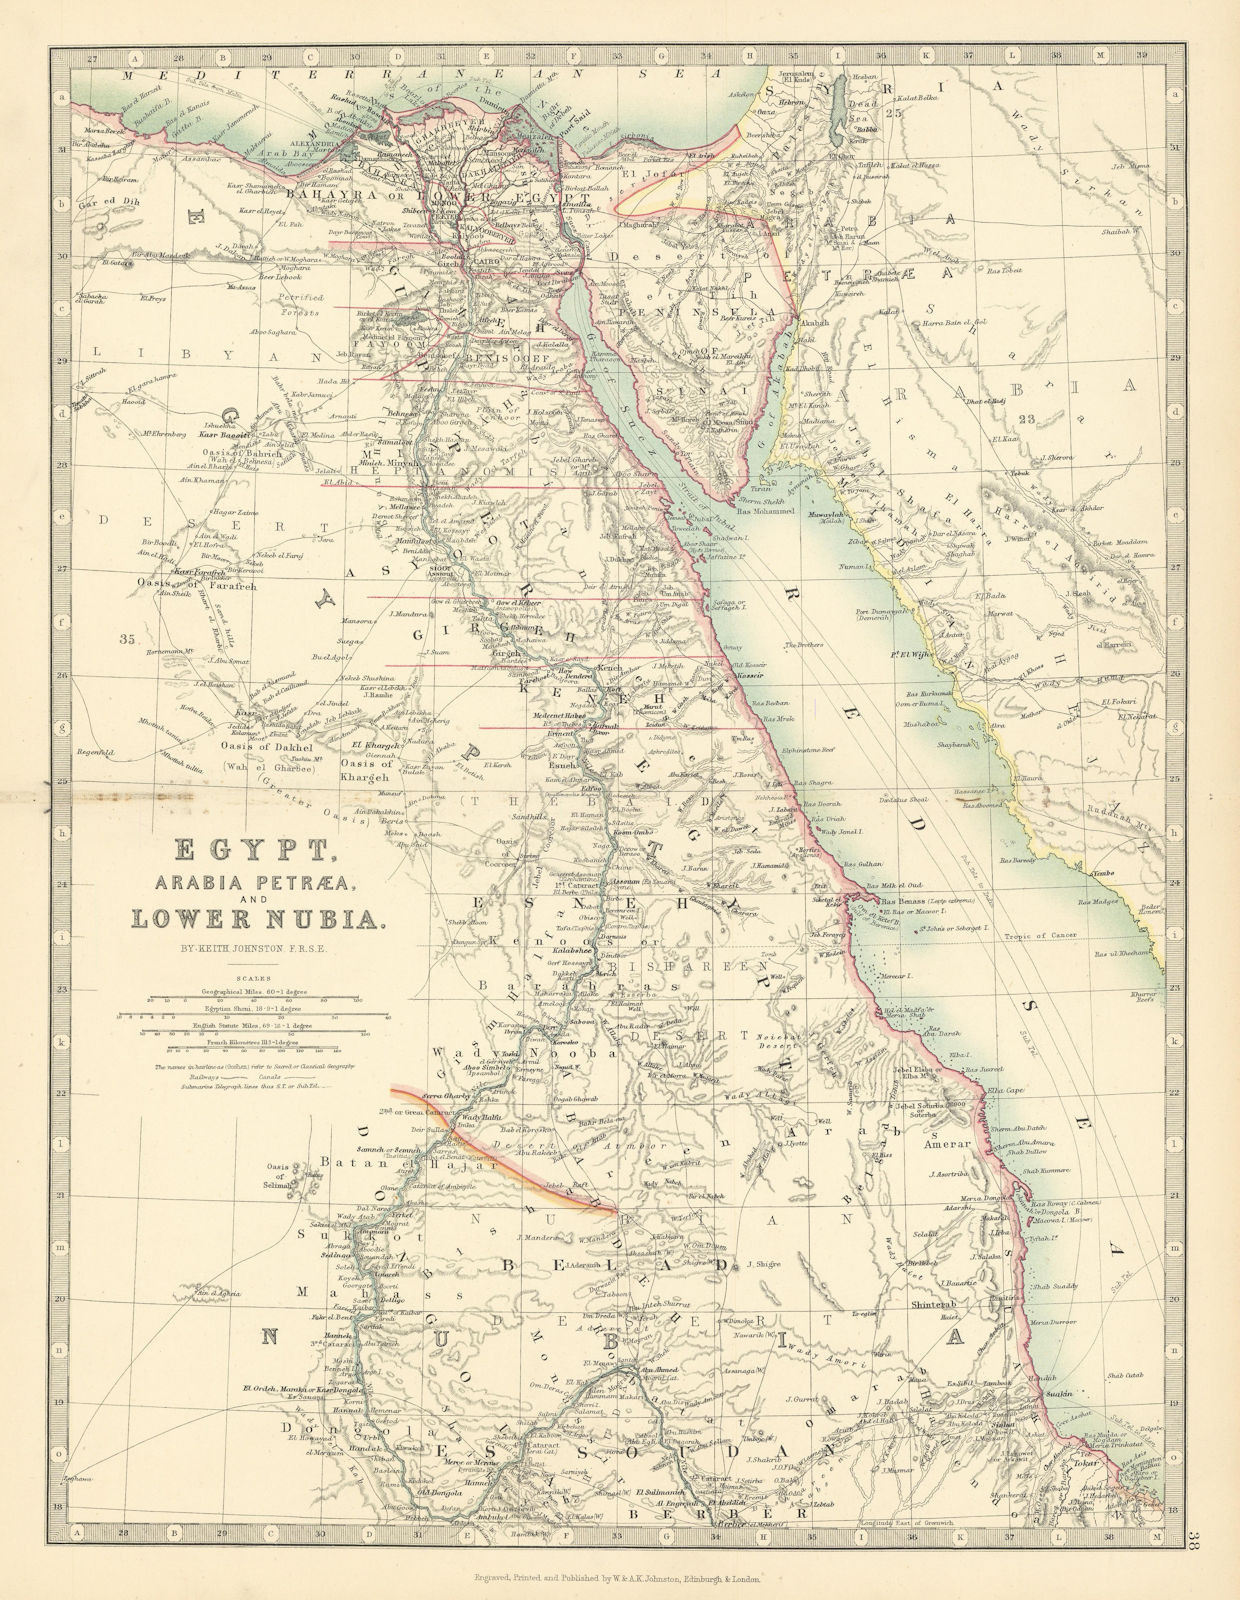 NILE VALLEY Egypt, Arabia Petraea and Lower Nubia Divisions JOHNSTON 1897 map